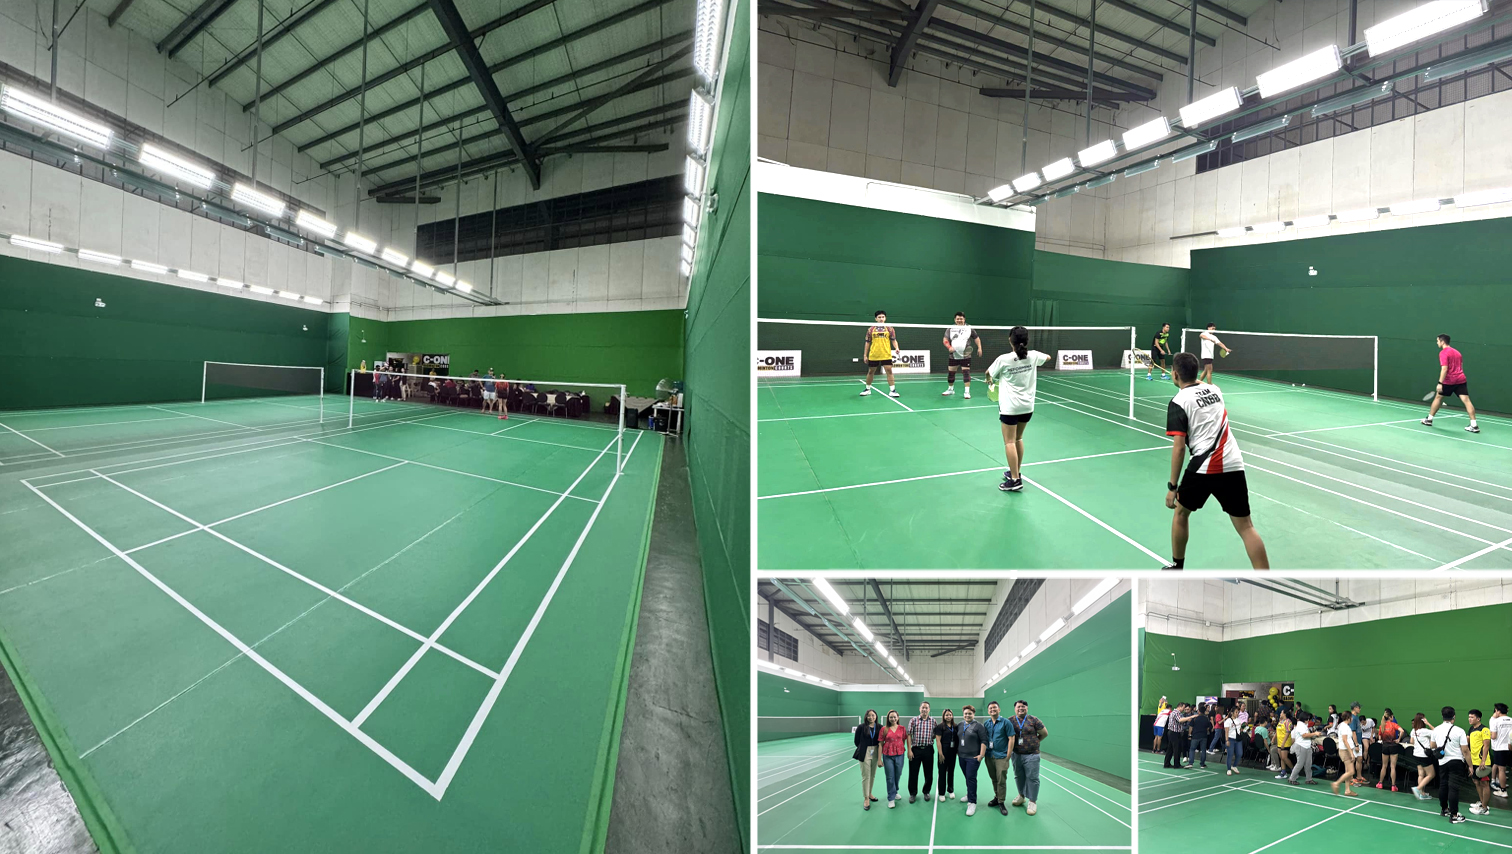 C-One Sports Center Badminton Courts now open at SM City CDO Uptown